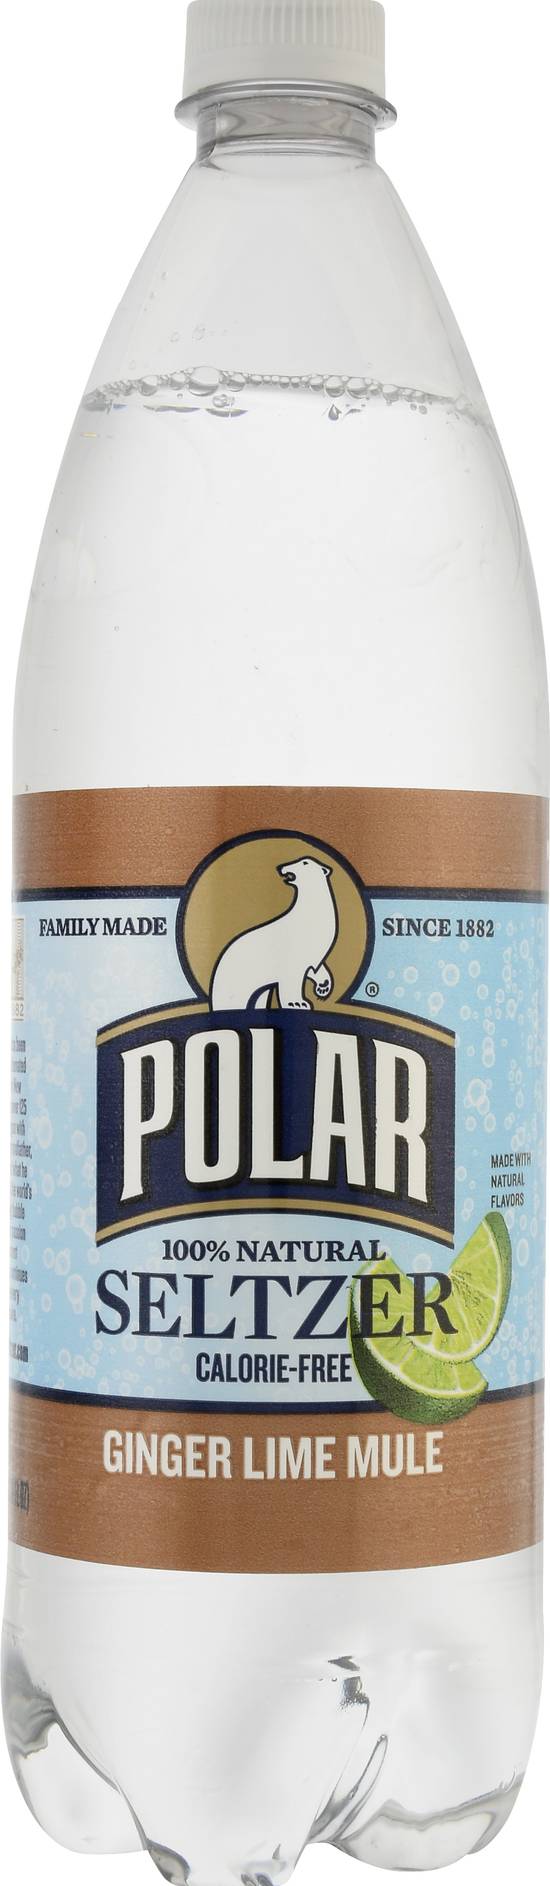 Polar Ginger Lime Mule Seltzer (32 fl oz) | Delivery Near You